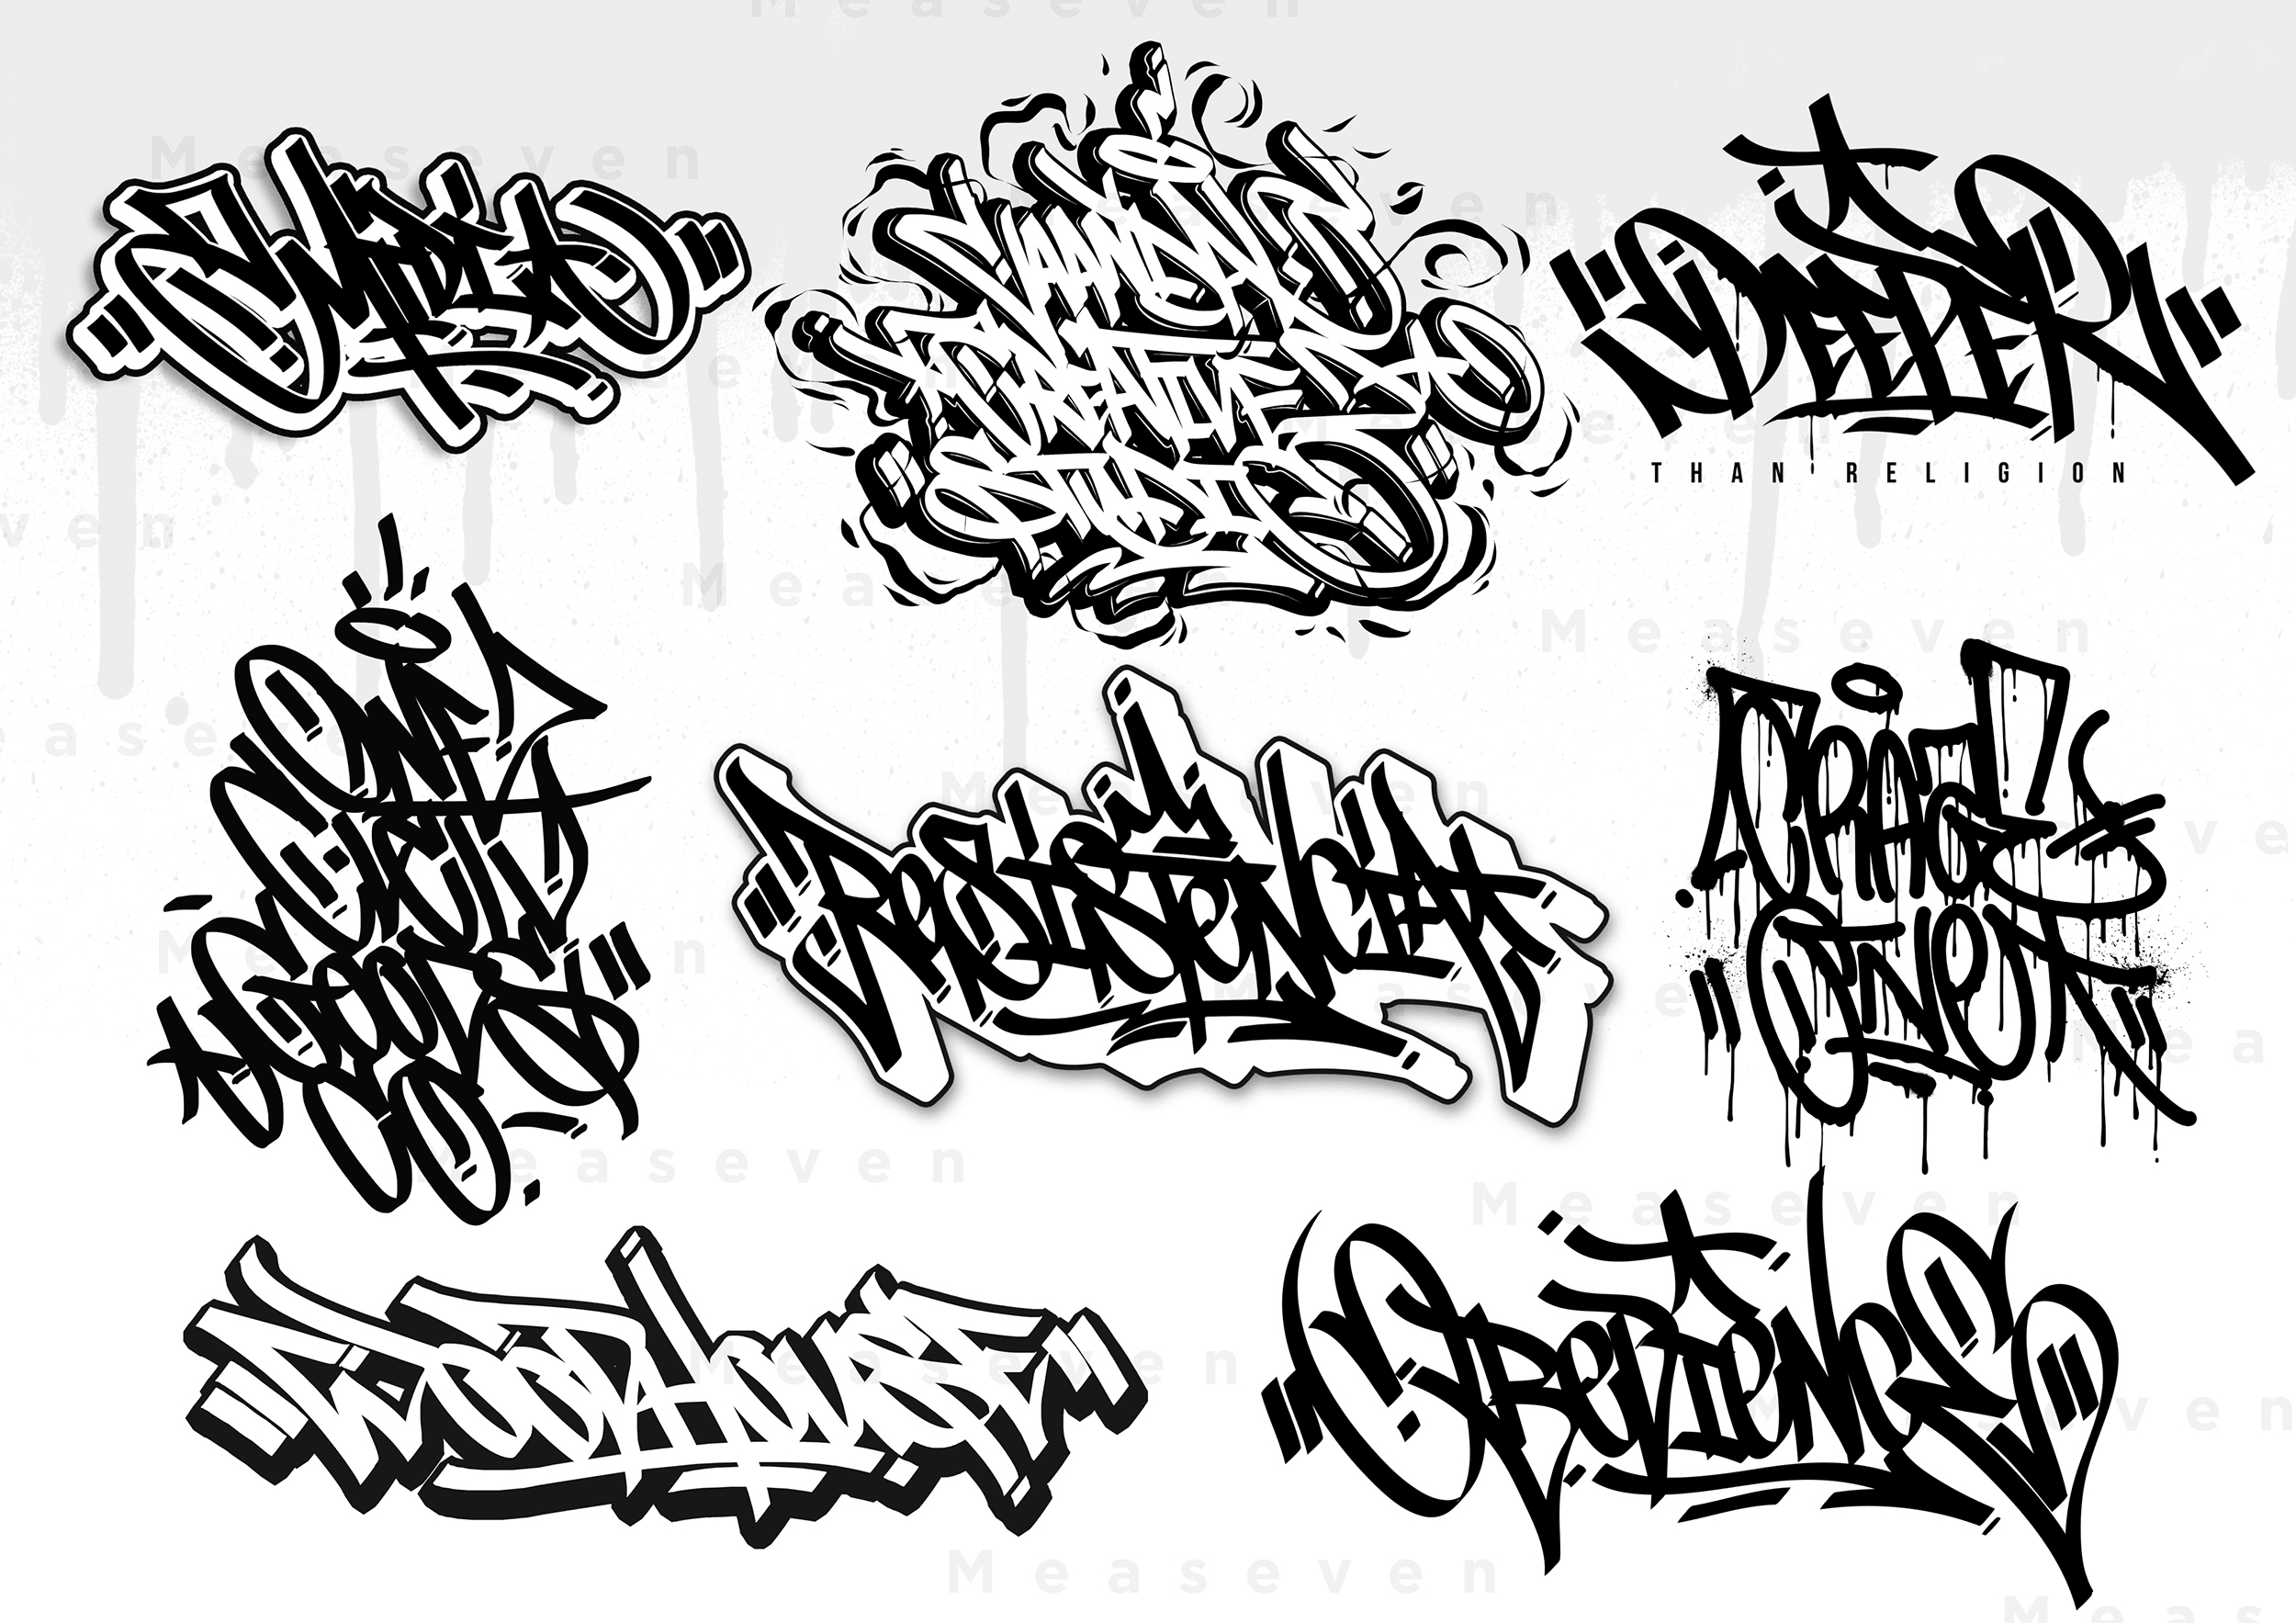 Do some great graffiti tags for you by Piksdailycomix